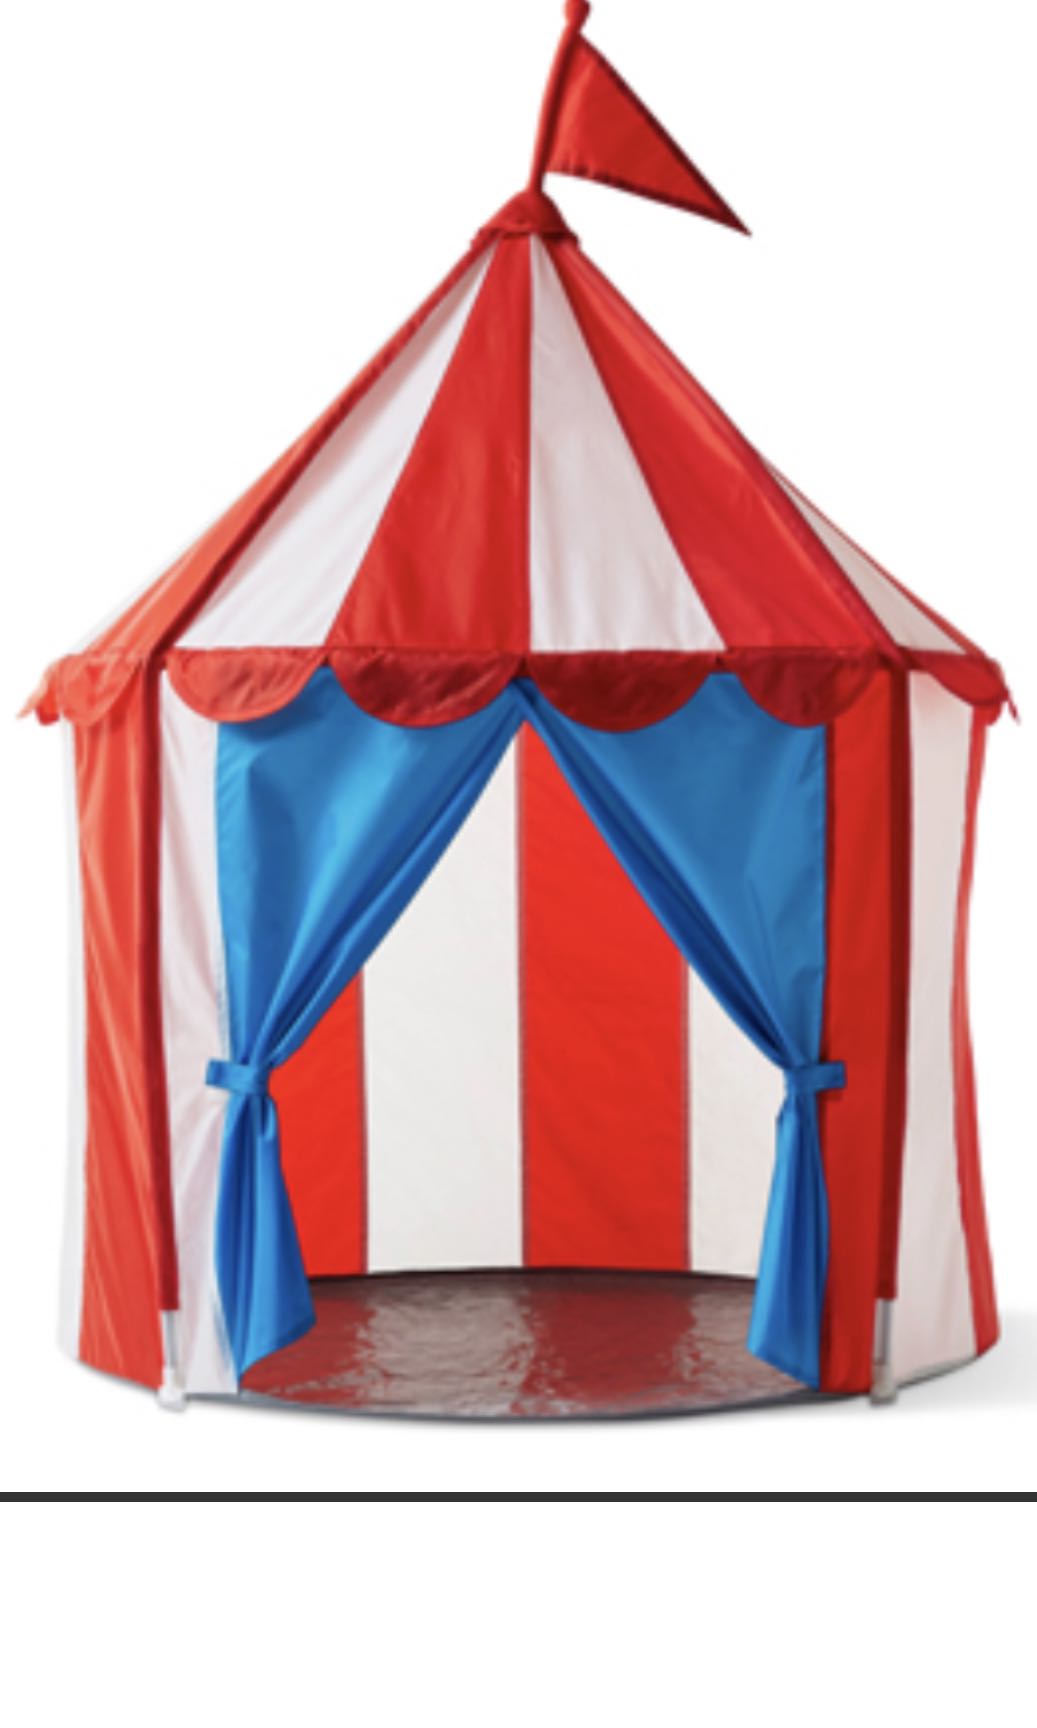 ikea toy tent